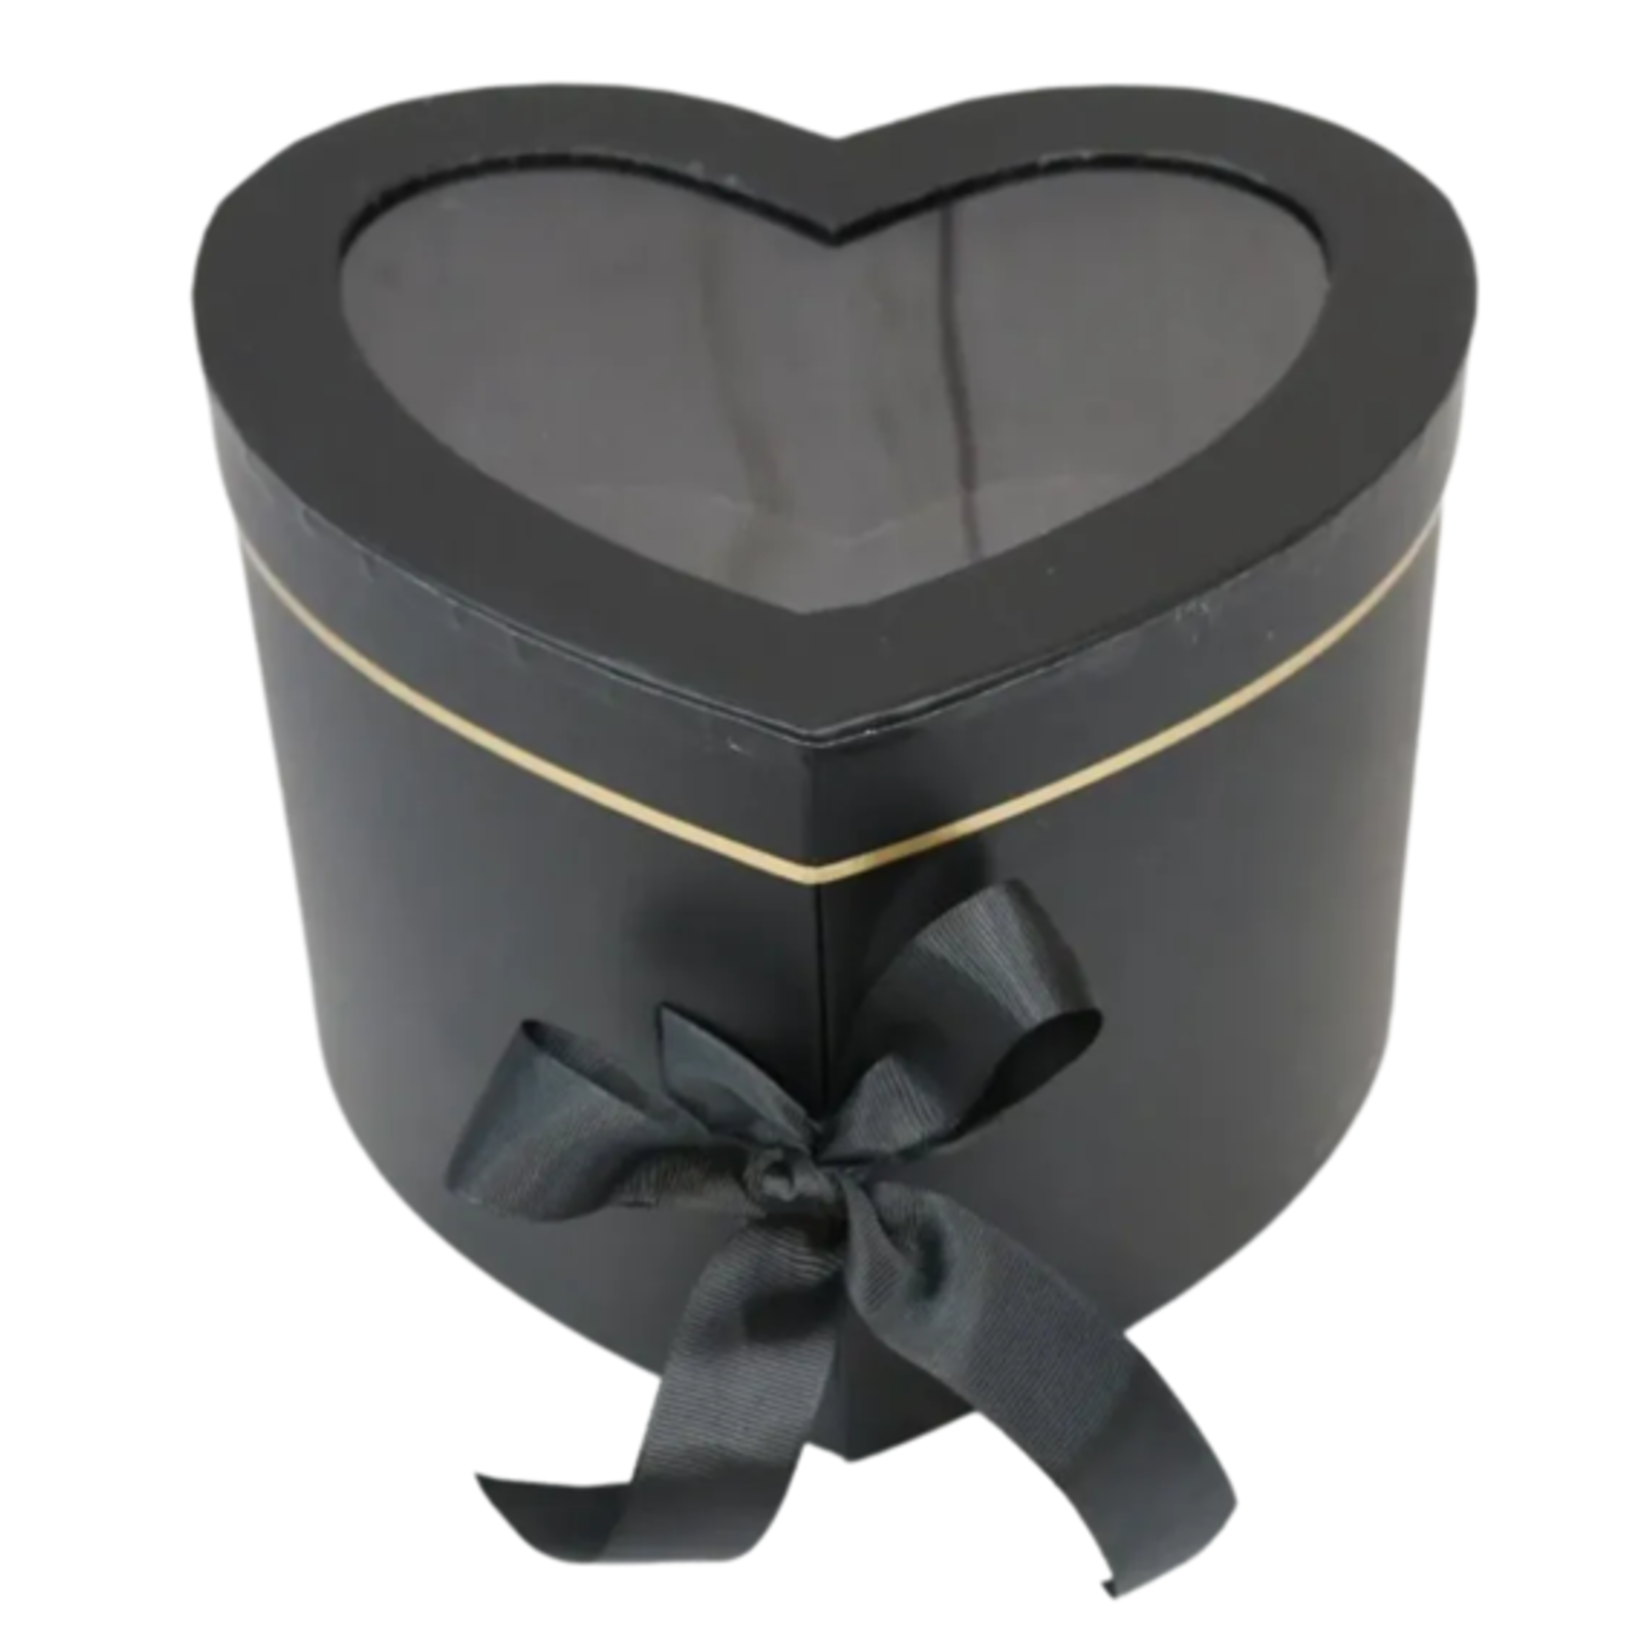 9" x 6.75" BLACK HEART BOX WITH CLEAR TOP, REG $14.99